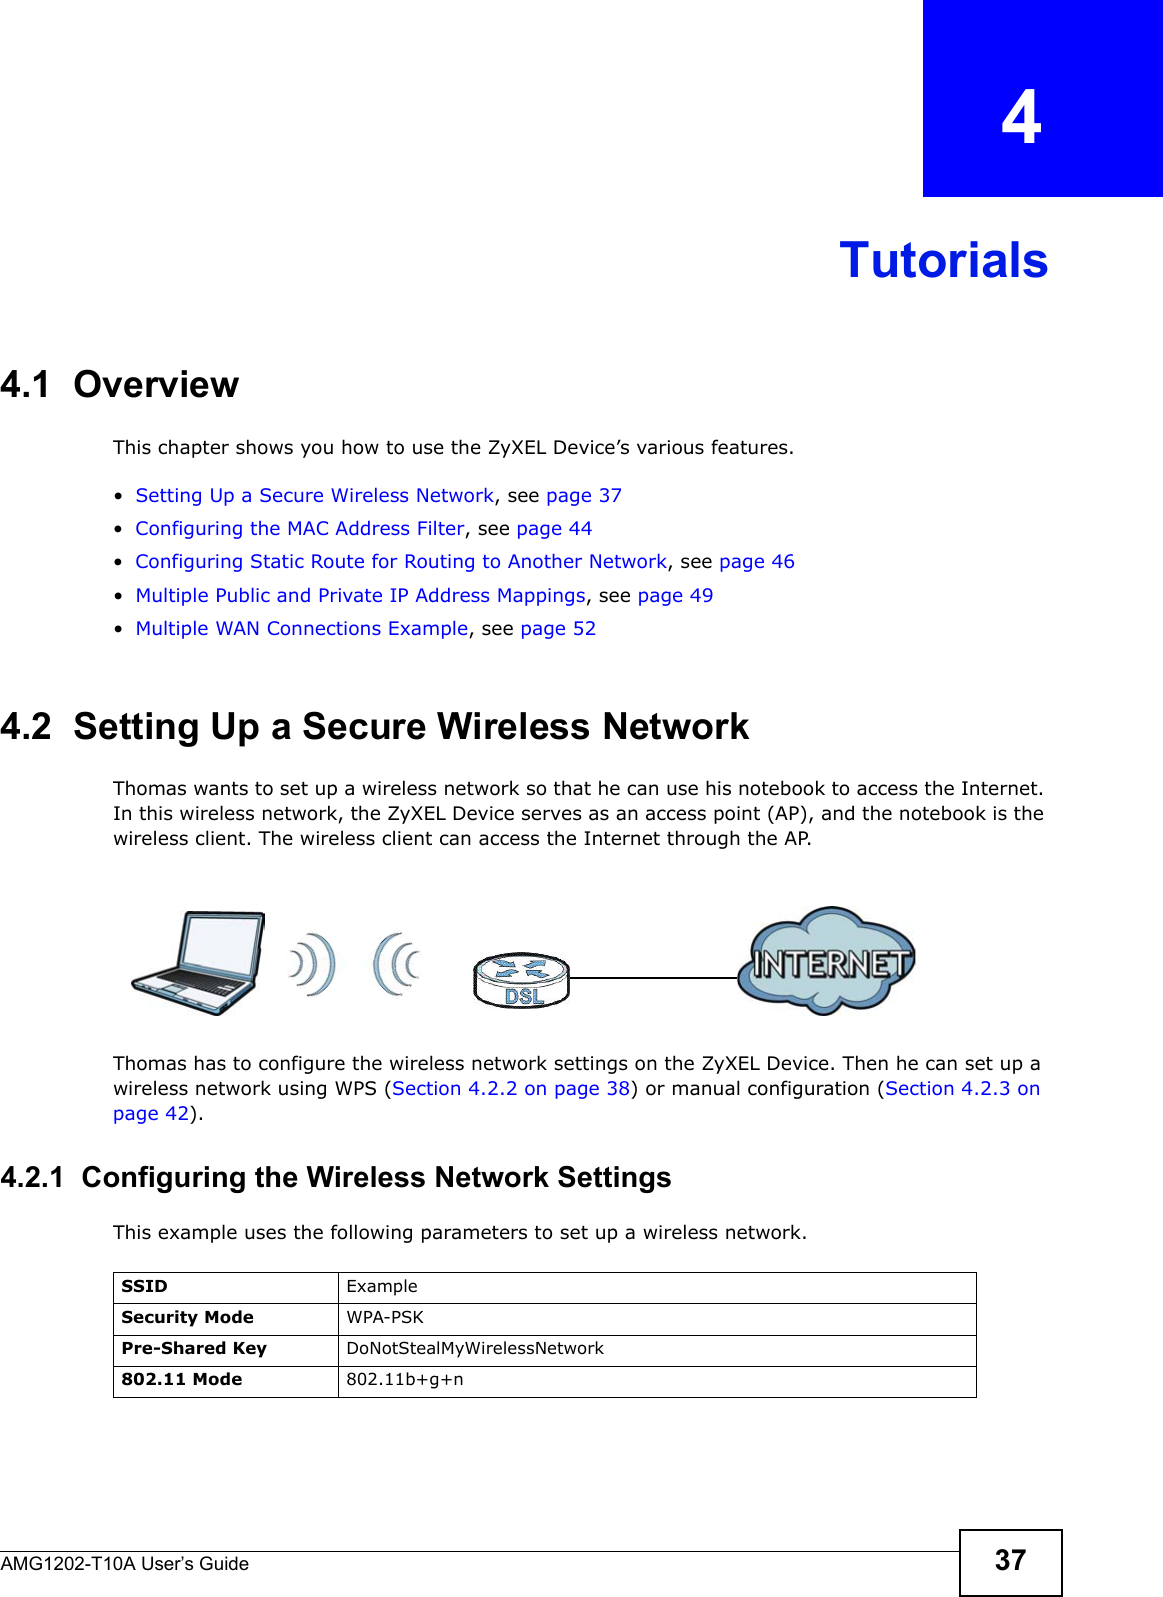 AMG1202-T10A User’s Guide 37CHAPTER   4Tutorials4.1  OverviewThis chapter shows you how to use the ZyXEL Device’s various features.•Setting Up a Secure Wireless Network, see page 37•Configuring the MAC Address Filter, see page 44•Configuring Static Route for Routing to Another Network, see page 46•Multiple Public and Private IP Address Mappings, see page 49•Multiple WAN Connections Example, see page 524.2  Setting Up a Secure Wireless NetworkThomas wants to set up a wireless network so that he can use his notebook to access the Internet. In this wireless network, the ZyXEL Device serves as an access point (AP), and the notebook is the wireless client. The wireless client can access the Internet through the AP.Thomas has to configure the wireless network settings on the ZyXEL Device. Then he can set up a wireless network using WPS (Section 4.2.2 on page 38) or manual configuration (Section 4.2.3 on page 42).4.2.1  Configuring the Wireless Network SettingsThis example uses the following parameters to set up a wireless network.SSID ExampleSecurity Mode WPA-PSKPre-Shared Key DoNotStealMyWirelessNetwork802.11 Mode 802.11b+g+n